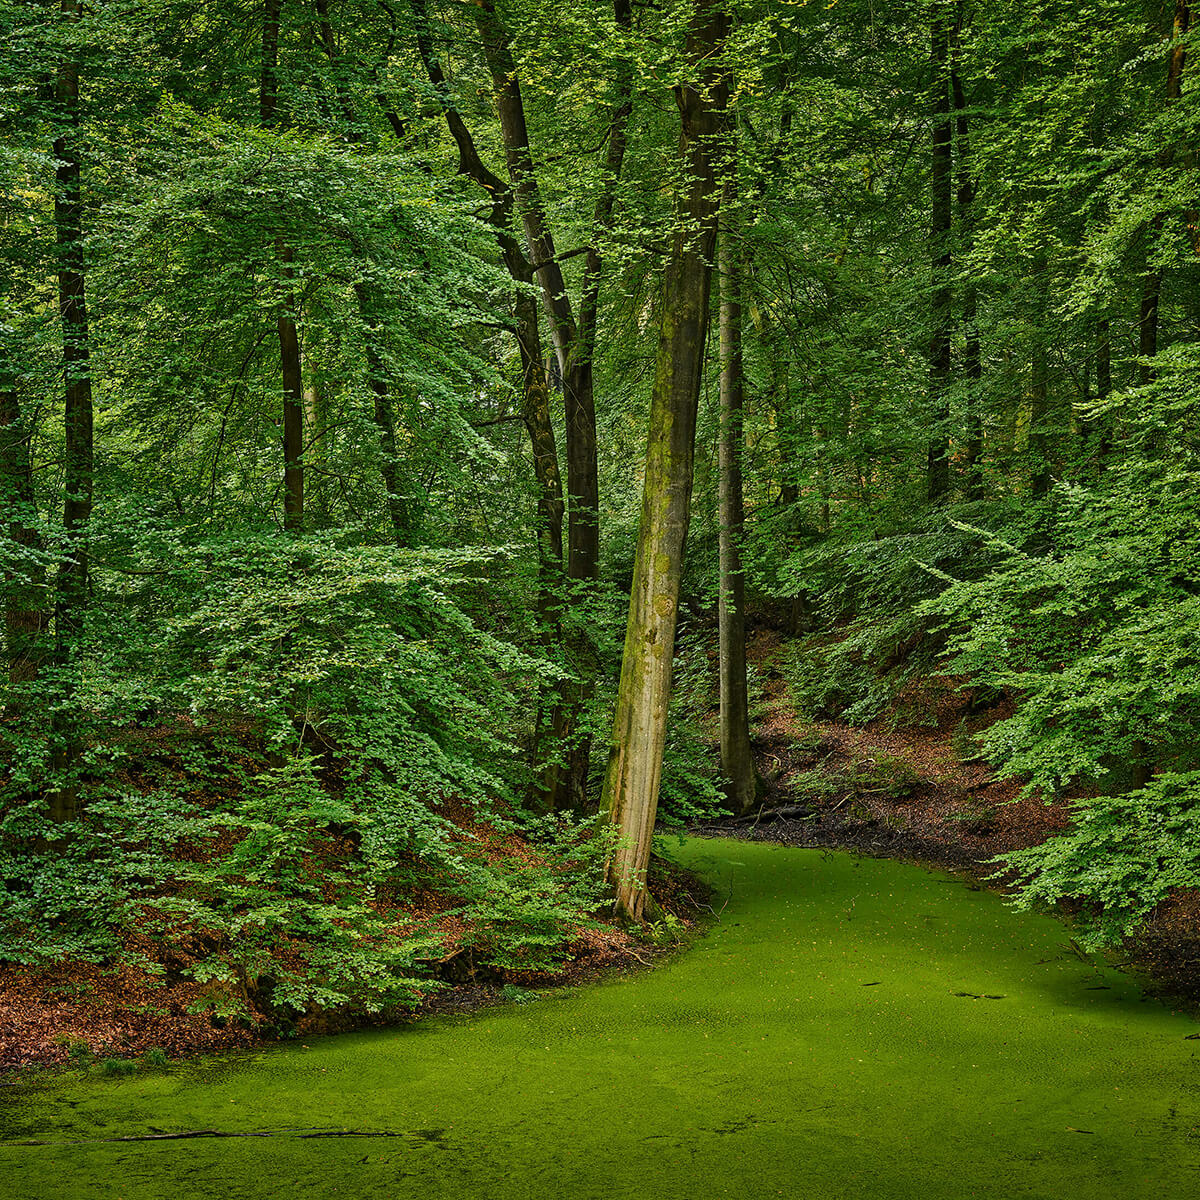 Stream with duckweed in the woods